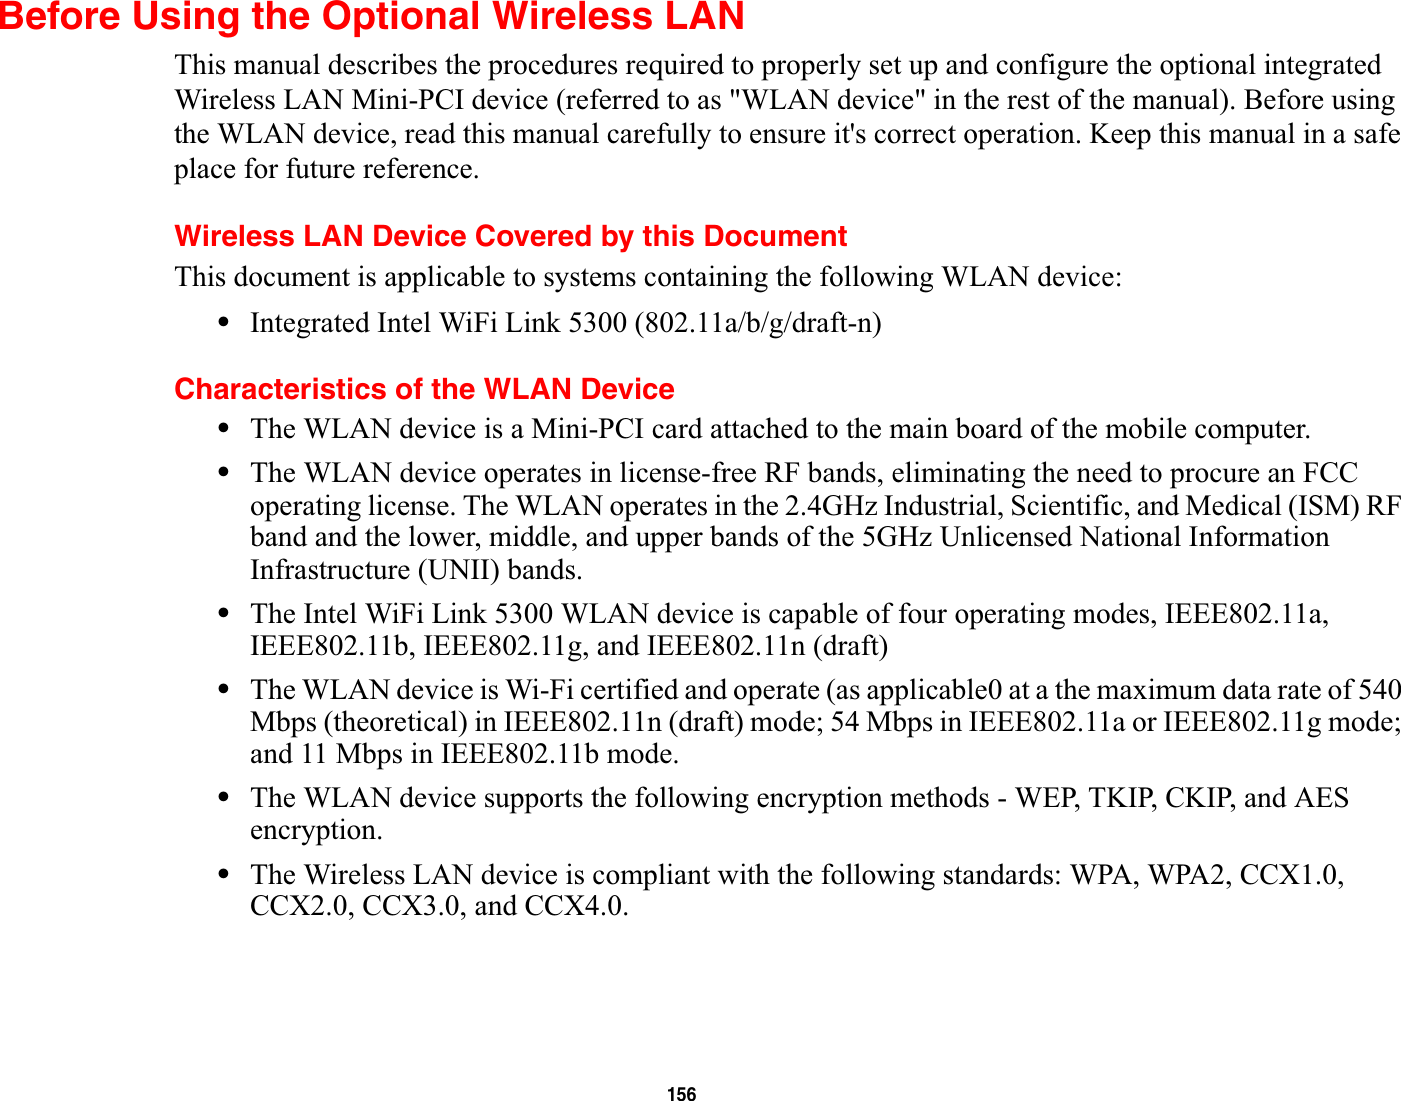 156Before Using the Optional Wireless LANThis manual describes the procedures required to properly set up and configure the optional integrated Wireless LAN Mini-PCI device (referred to as &quot;WLAN device&quot; in the rest of the manual). Before using the WLAN device, read this manual carefully to ensure it&apos;s correct operation. Keep this manual in a safe place for future reference.Wireless LAN Device Covered by this DocumentThis document is applicable to systems containing the following WLAN device:•Integrated Intel WiFi Link 5300 (802.11a/b/g/draft-n)Characteristics of the WLAN Device•The WLAN device is a Mini-PCI card attached to the main board of the mobile computer. •The WLAN device operates in license-free RF bands, eliminating the need to procure an FCC operating license. The WLAN operates in the 2.4GHz Industrial, Scientific, and Medical (ISM) RF band and the lower, middle, and upper bands of the 5GHz Unlicensed National Information Infrastructure (UNII) bands. •The Intel WiFi Link 5300 WLAN device is capable of four operating modes, IEEE802.11a, IEEE802.11b, IEEE802.11g, and IEEE802.11n (draft)•The WLAN device is Wi-Fi certified and operate (as applicable0 at a the maximum data rate of 540 Mbps (theoretical) in IEEE802.11n (draft) mode; 54 Mbps in IEEE802.11a or IEEE802.11g mode; and 11 Mbps in IEEE802.11b mode.•The WLAN device supports the following encryption methods - WEP, TKIP, CKIP, and AES encryption.•The Wireless LAN device is compliant with the following standards: WPA, WPA2, CCX1.0, CCX2.0, CCX3.0, and CCX4.0.